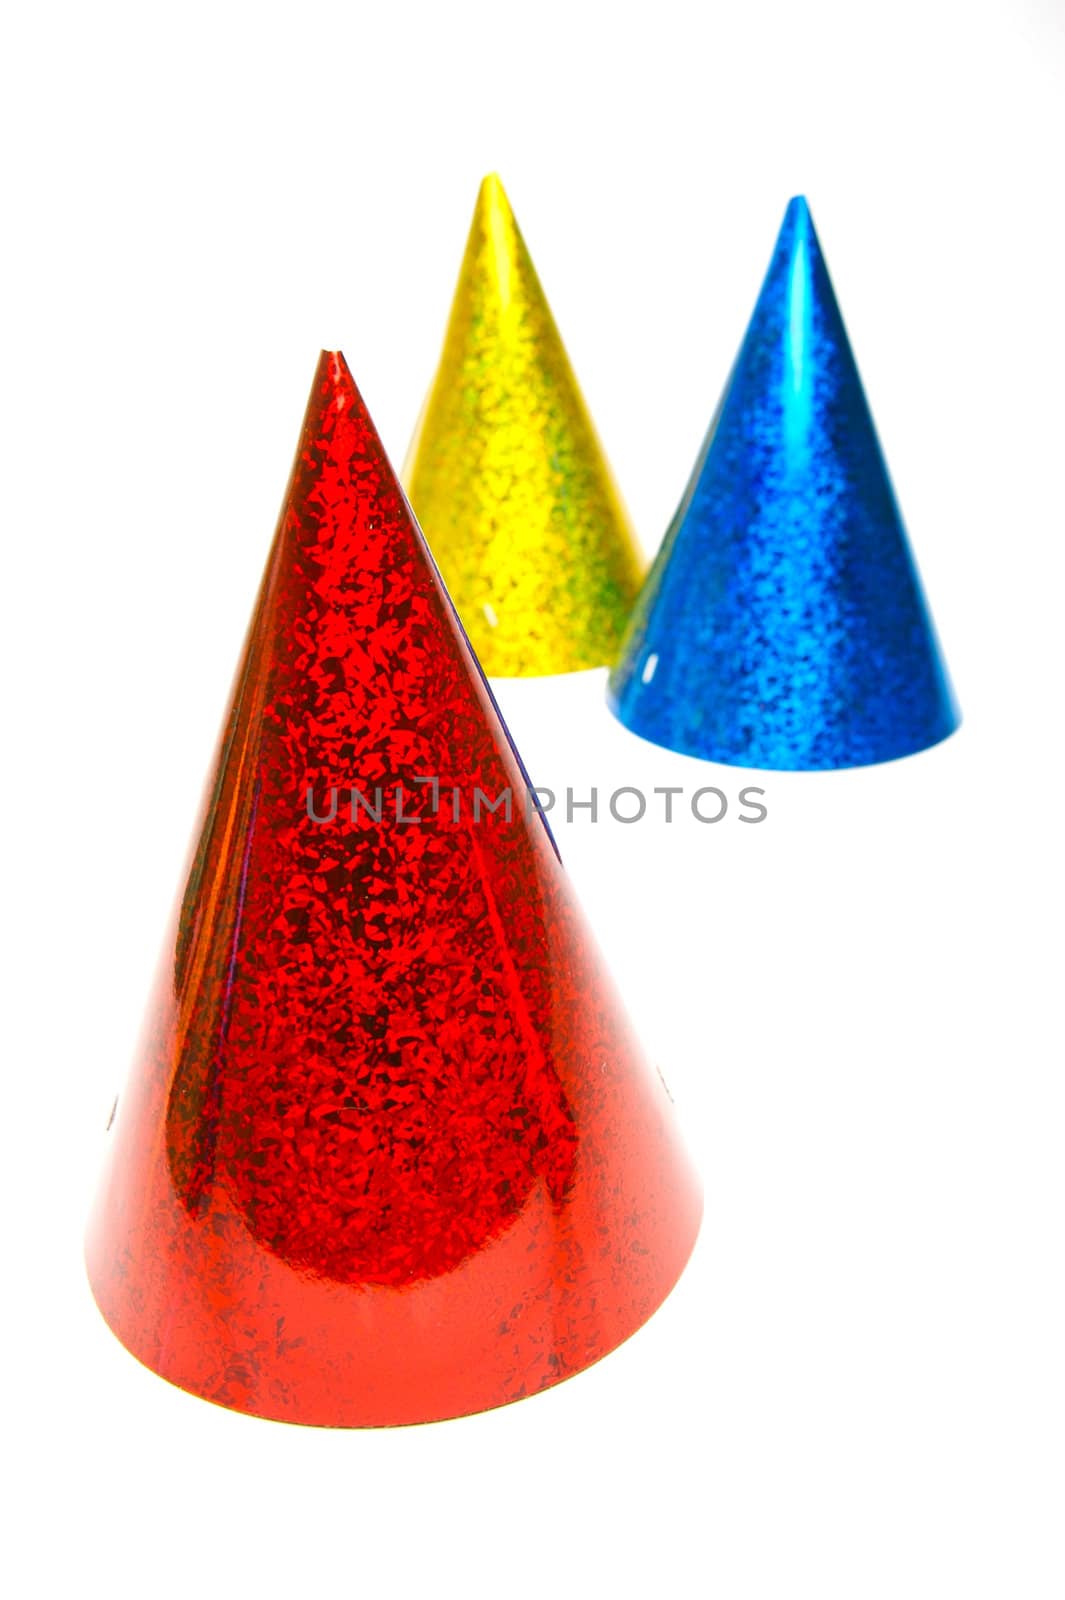 Party hats isolated against a white background